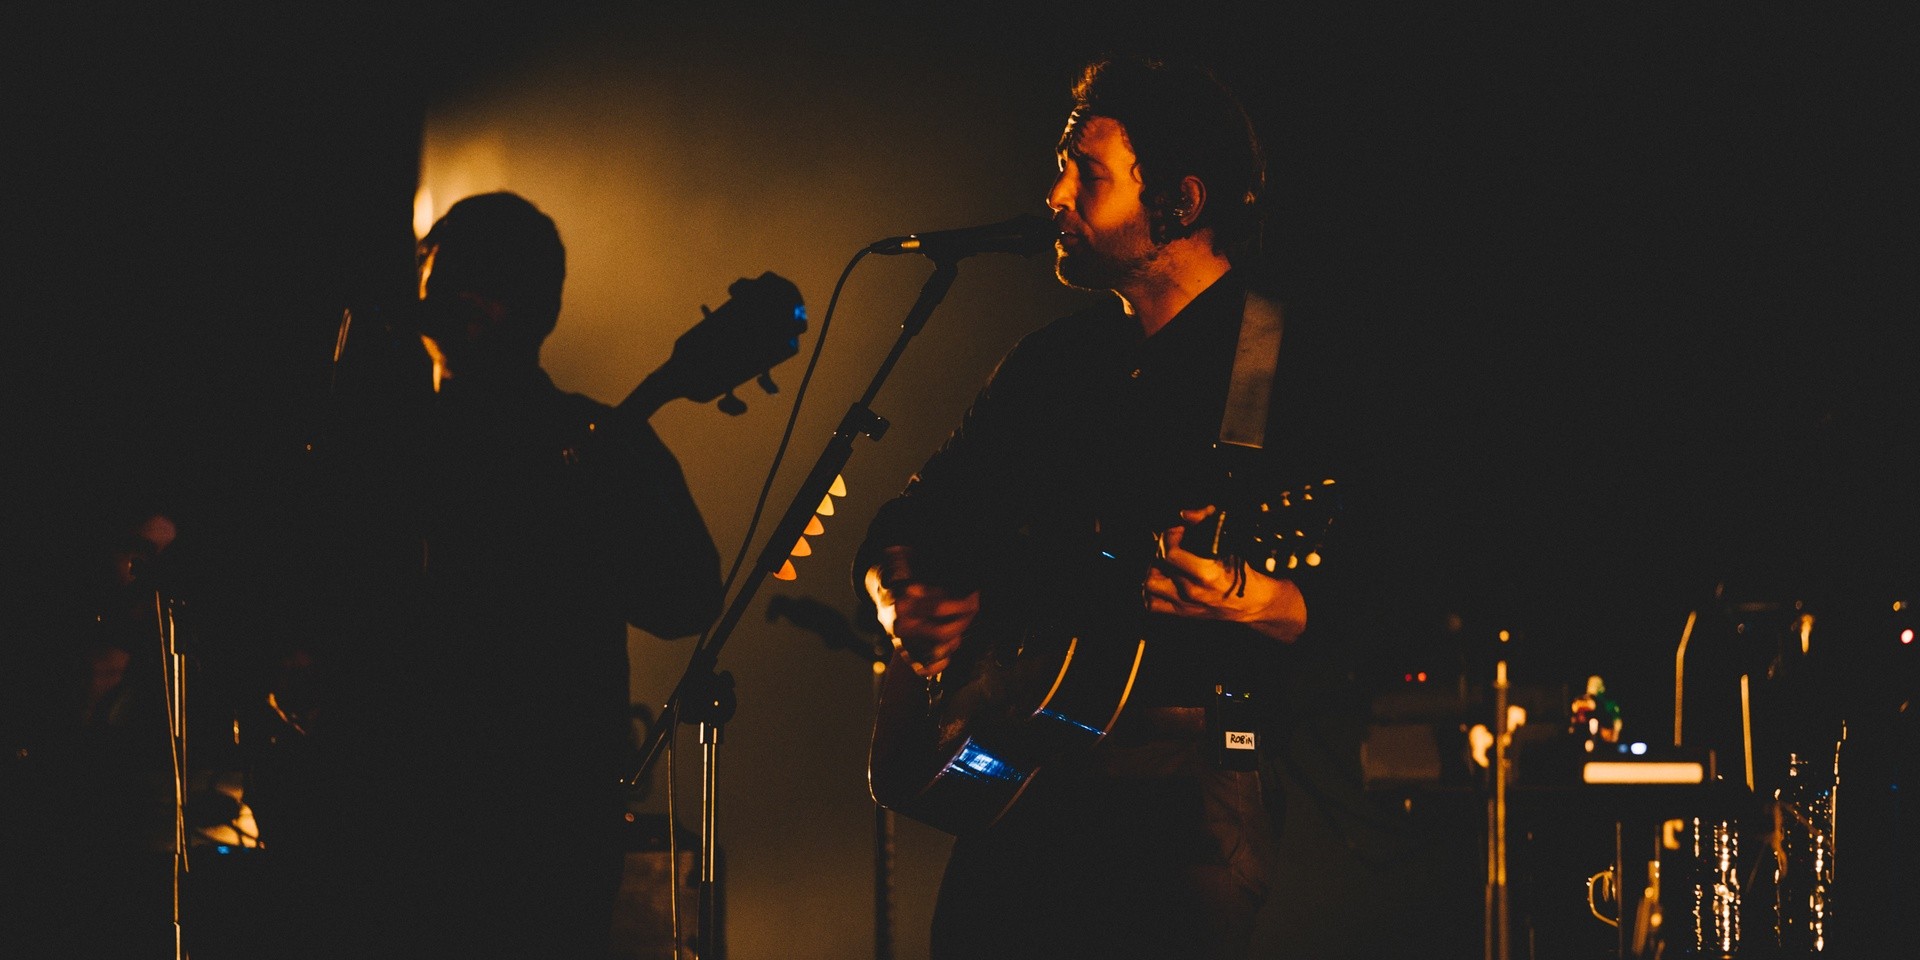 Need some help with your music? Send your song to Fleet Foxes' Robin Pecknold